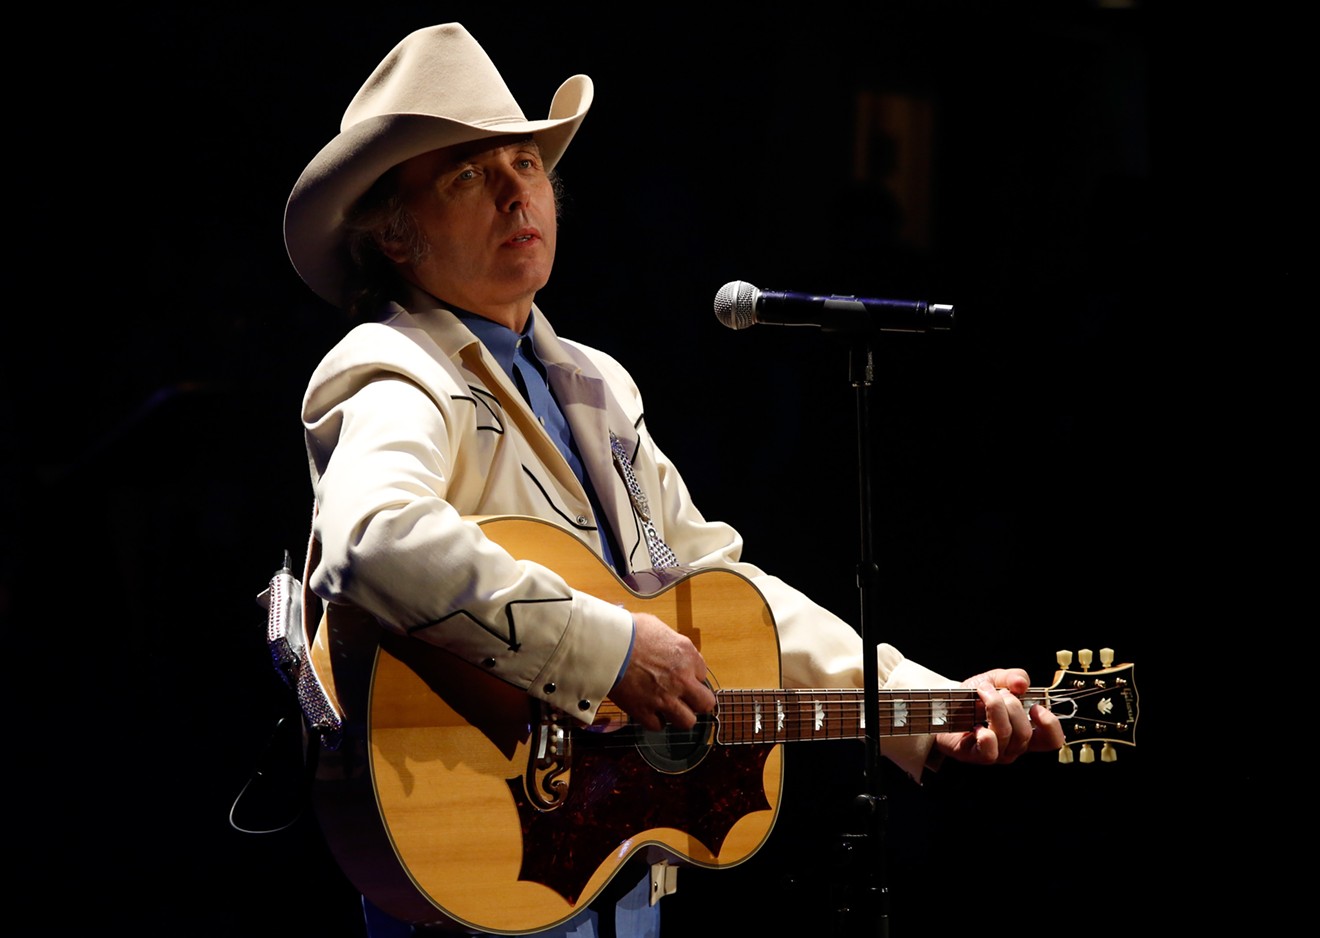 Dwight Yoakam, pictured at the 8th Annual ACM Honors, will be playing three nights at Billy Bob's in Fort Worth.